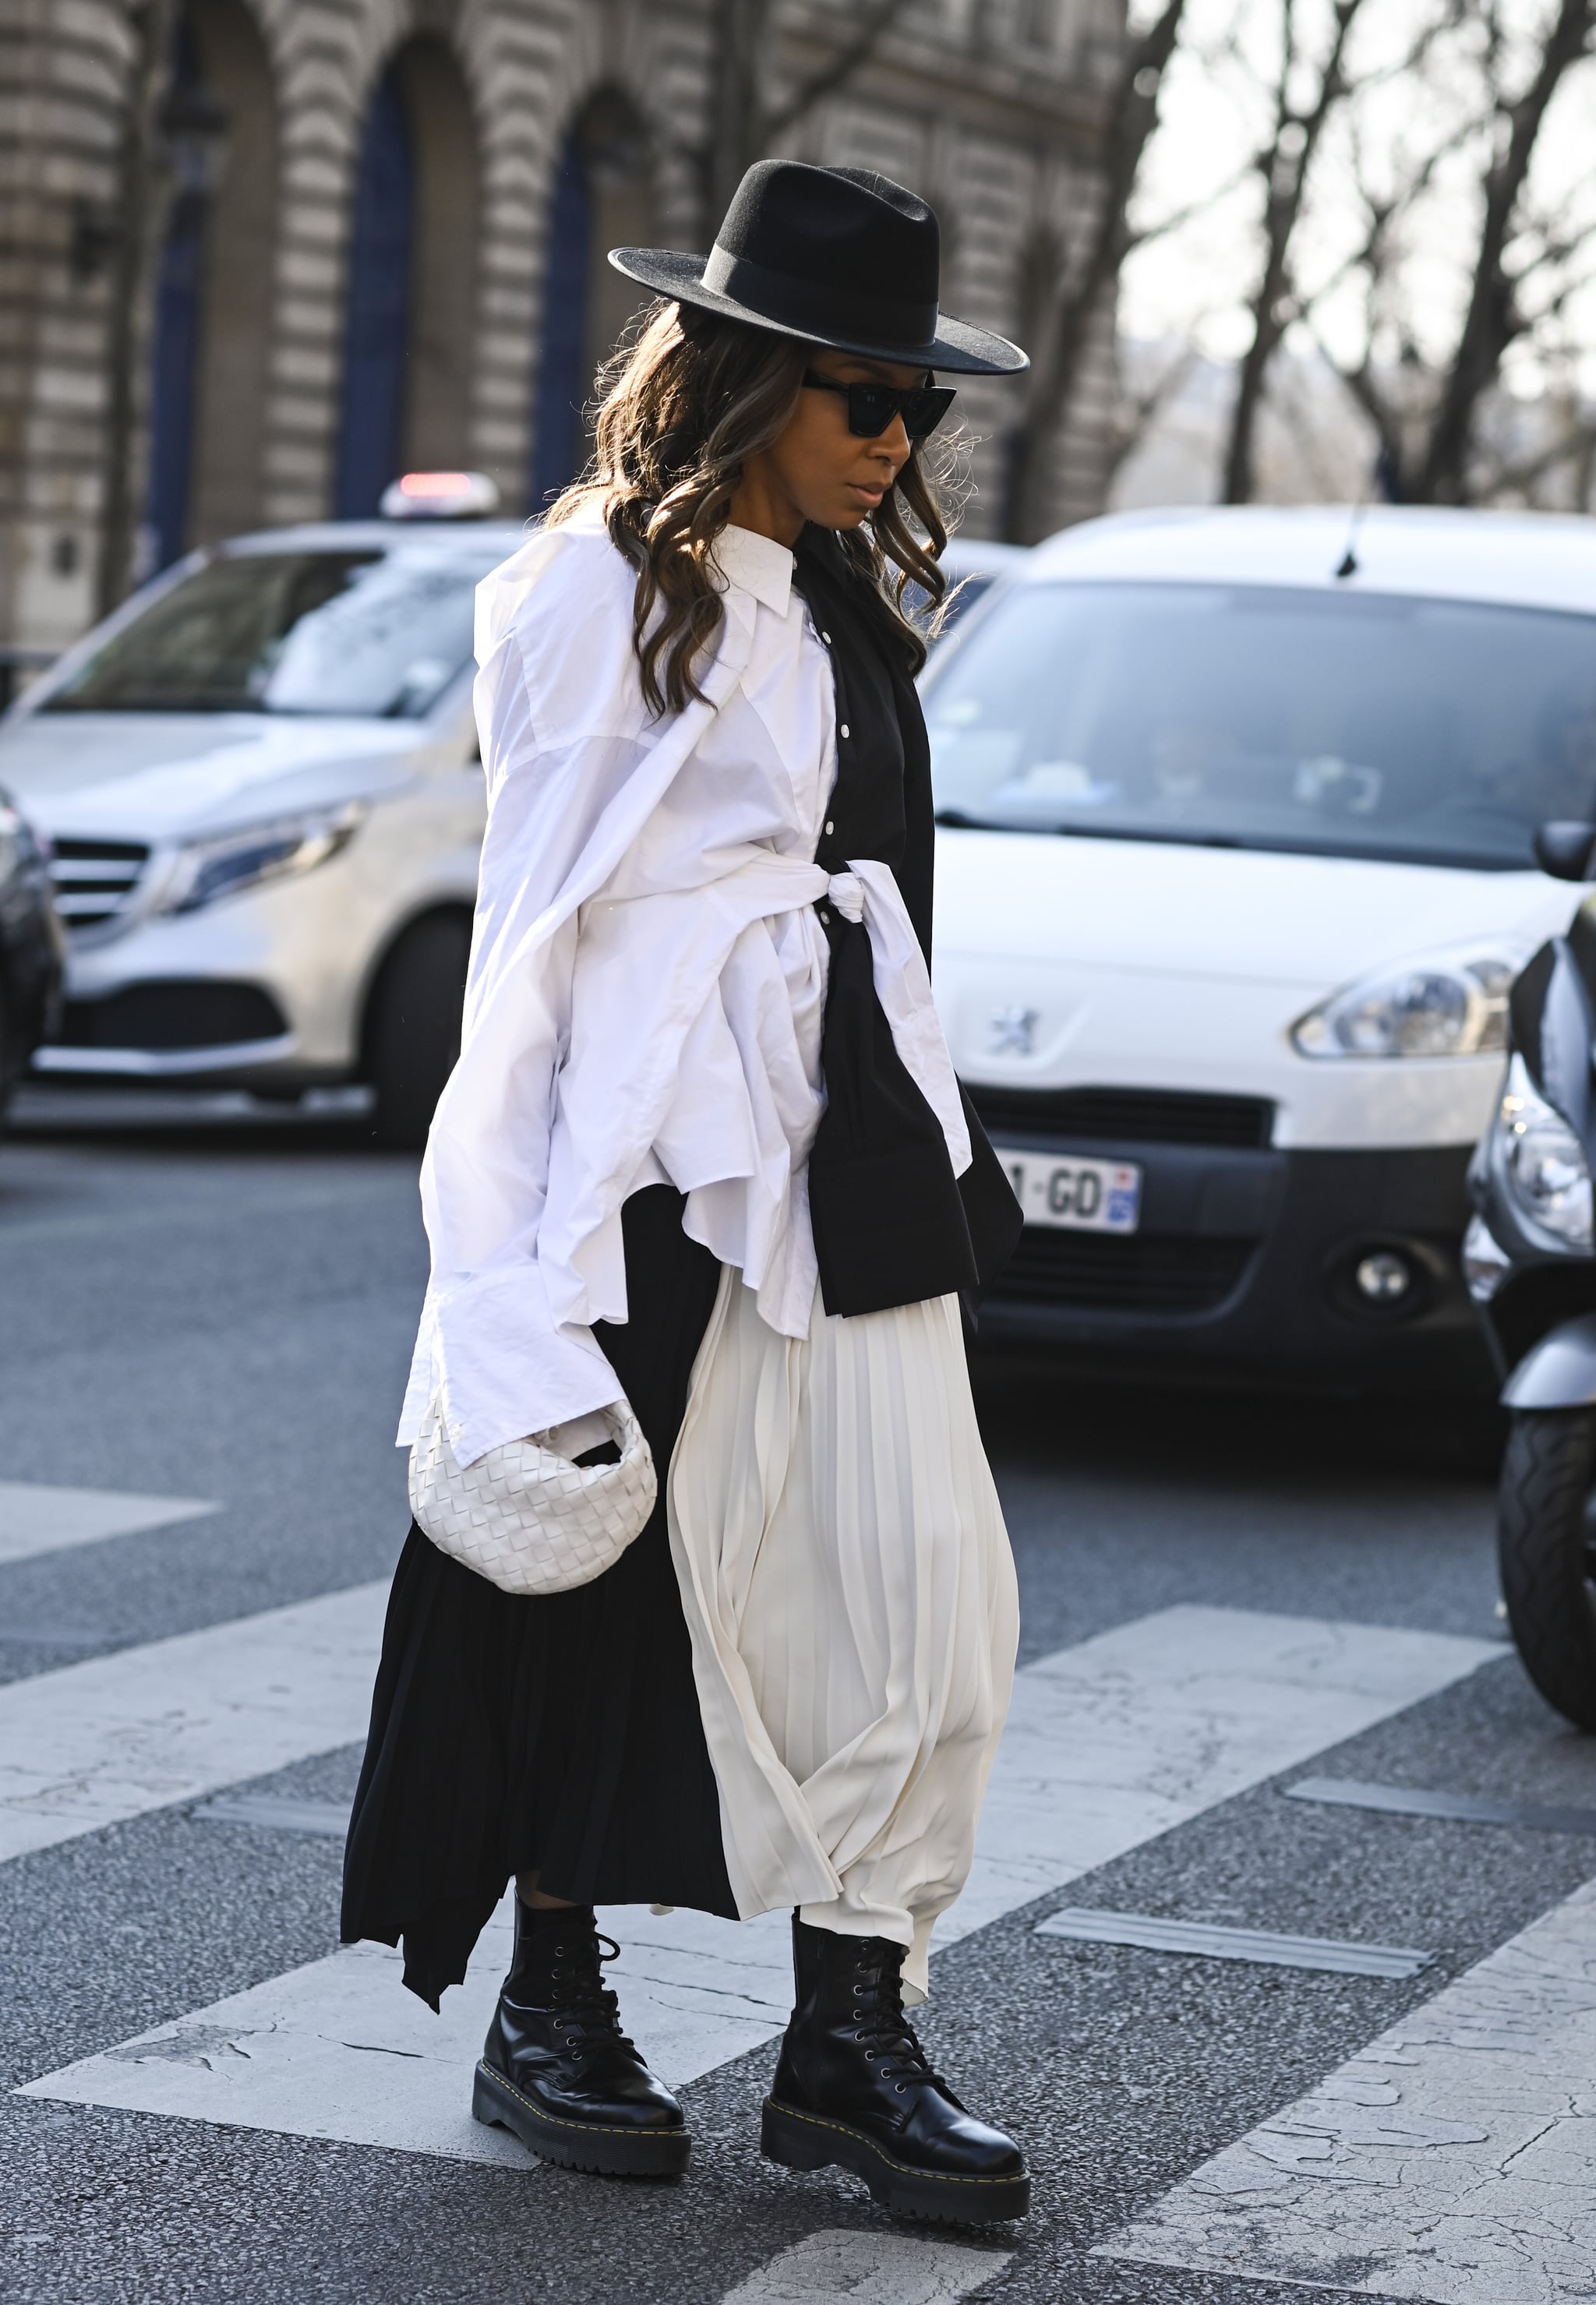 Doc Martens Outfit Idea: Slouchy Separates | 26 Ways to Style an Outfit  Around Your Doc Martens | POPSUGAR Fashion Photo 24